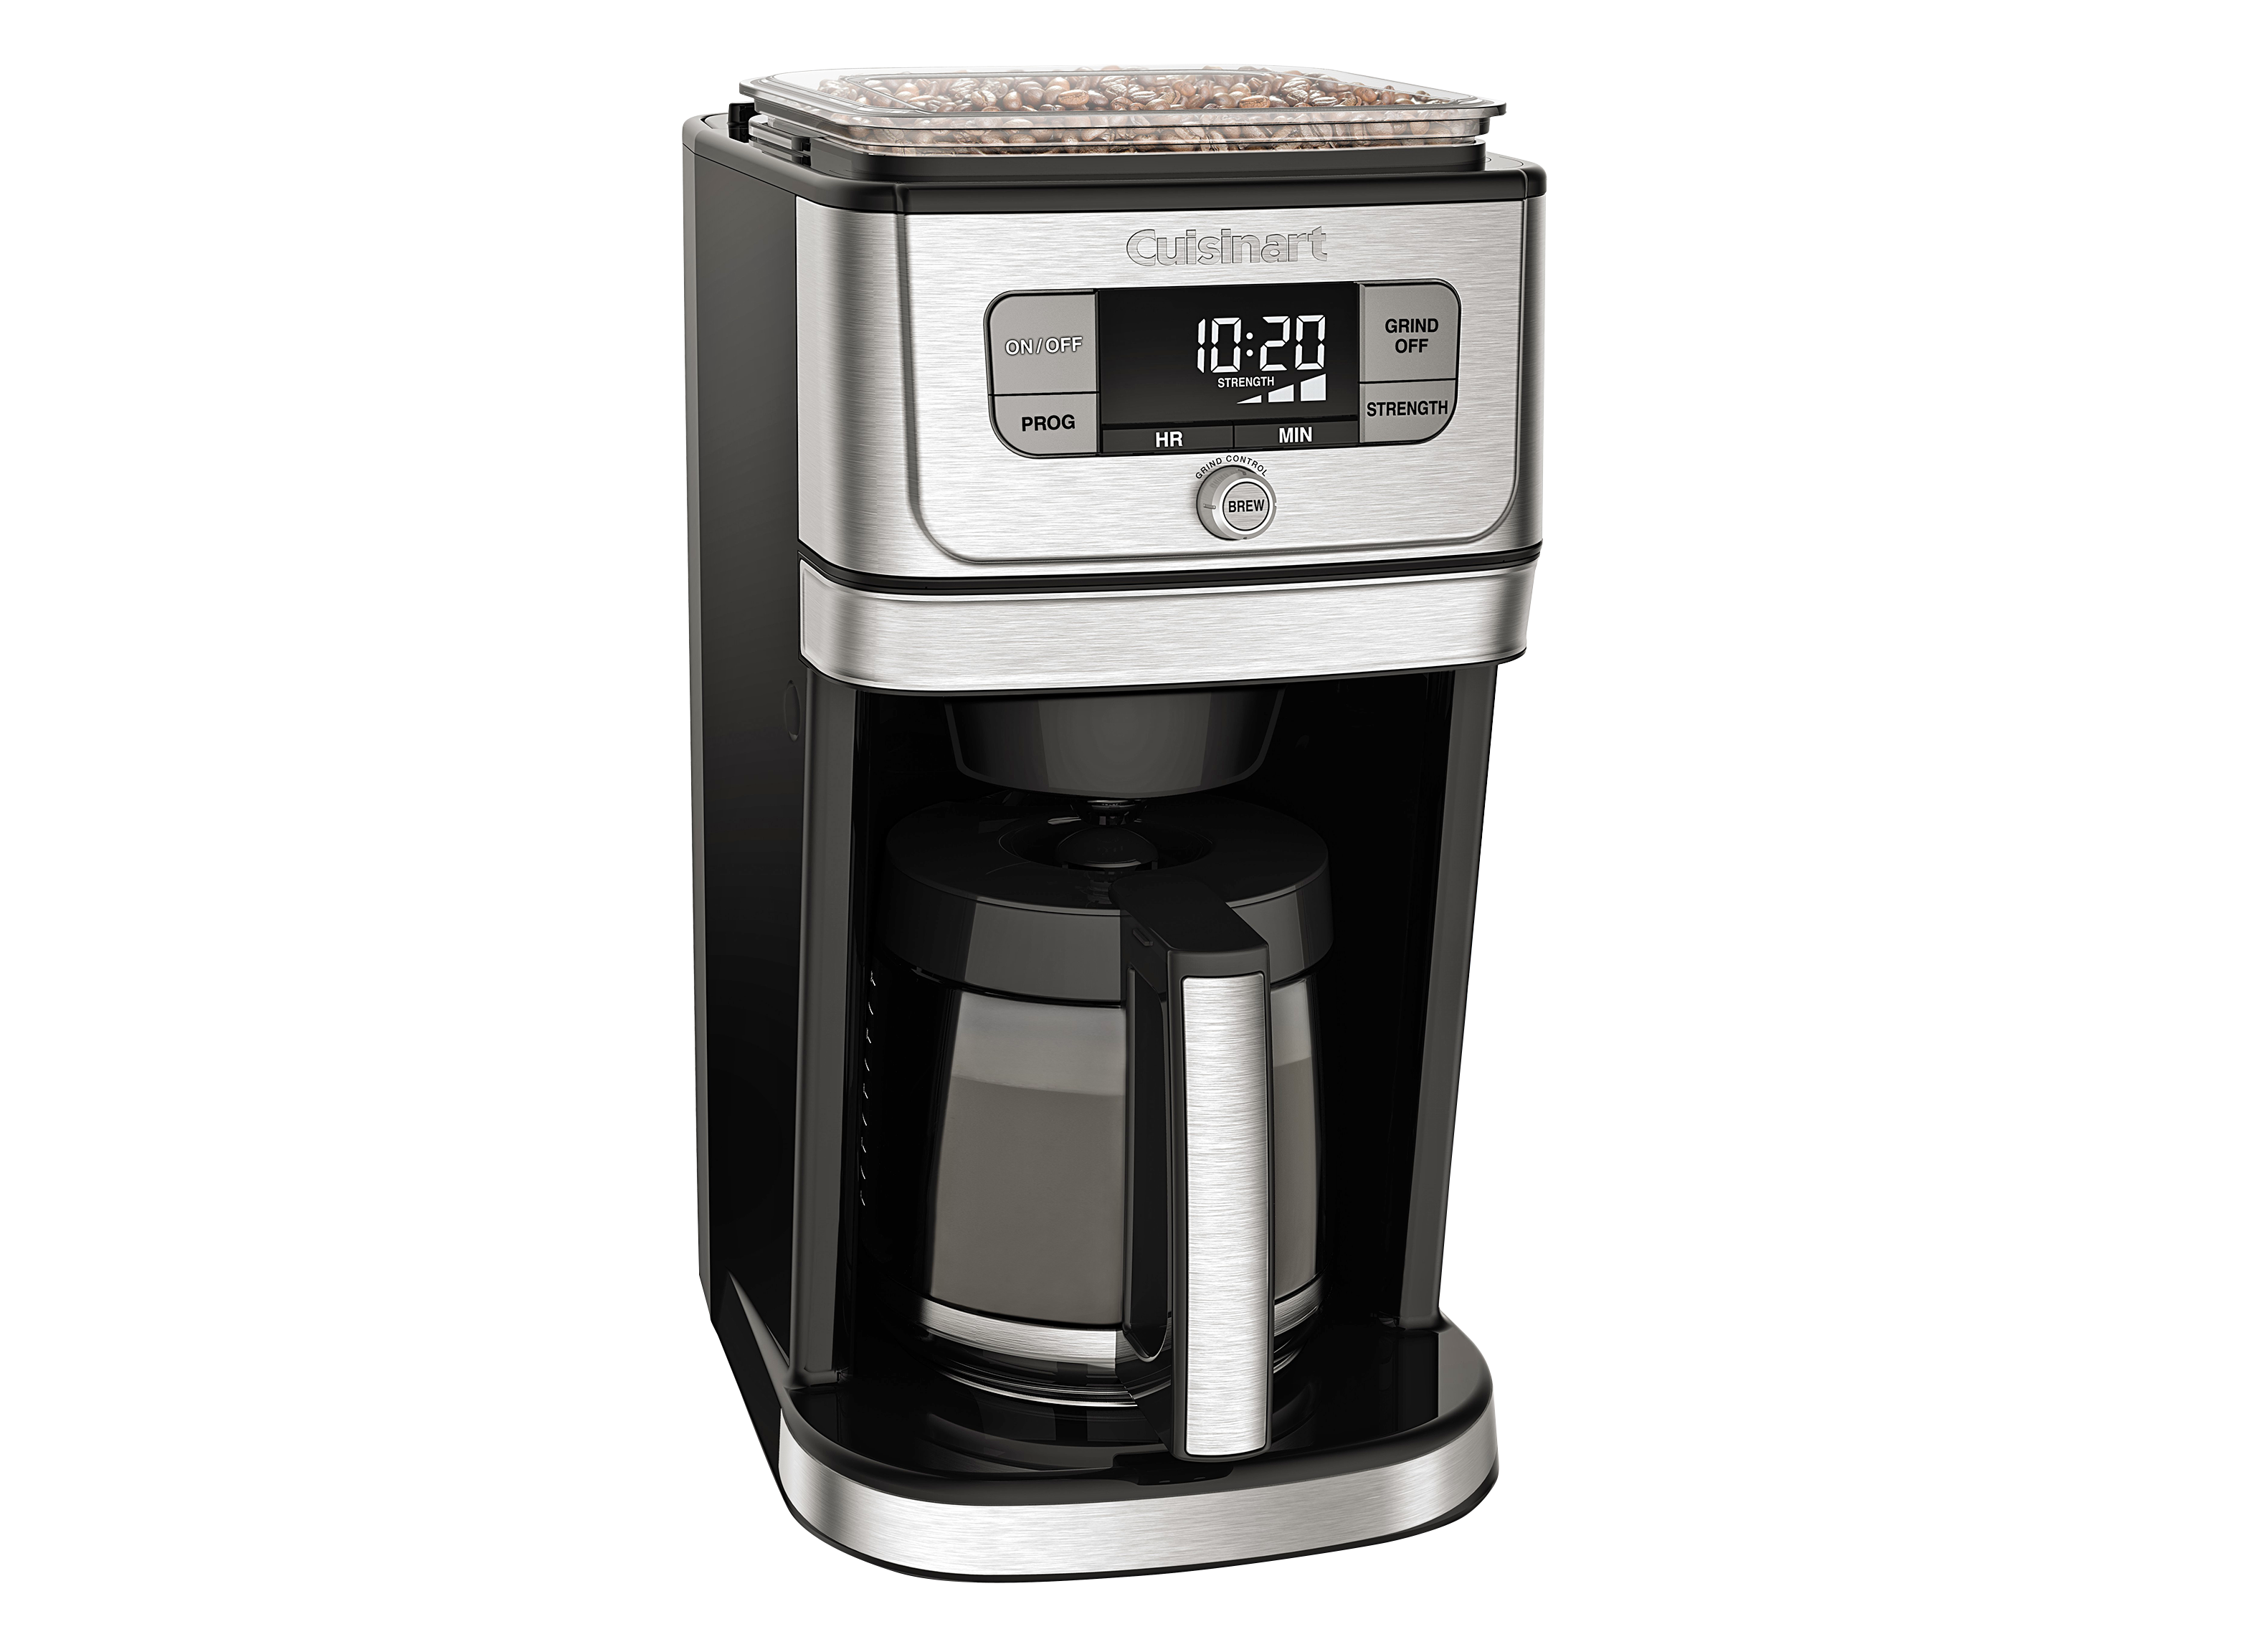 https://crdms.images.consumerreports.org/prod/products/cr/models/396981-drip-coffee-makers-cuisinart-next-generation-burr-grind-brew-12-cup-dgb-800-10000912.png